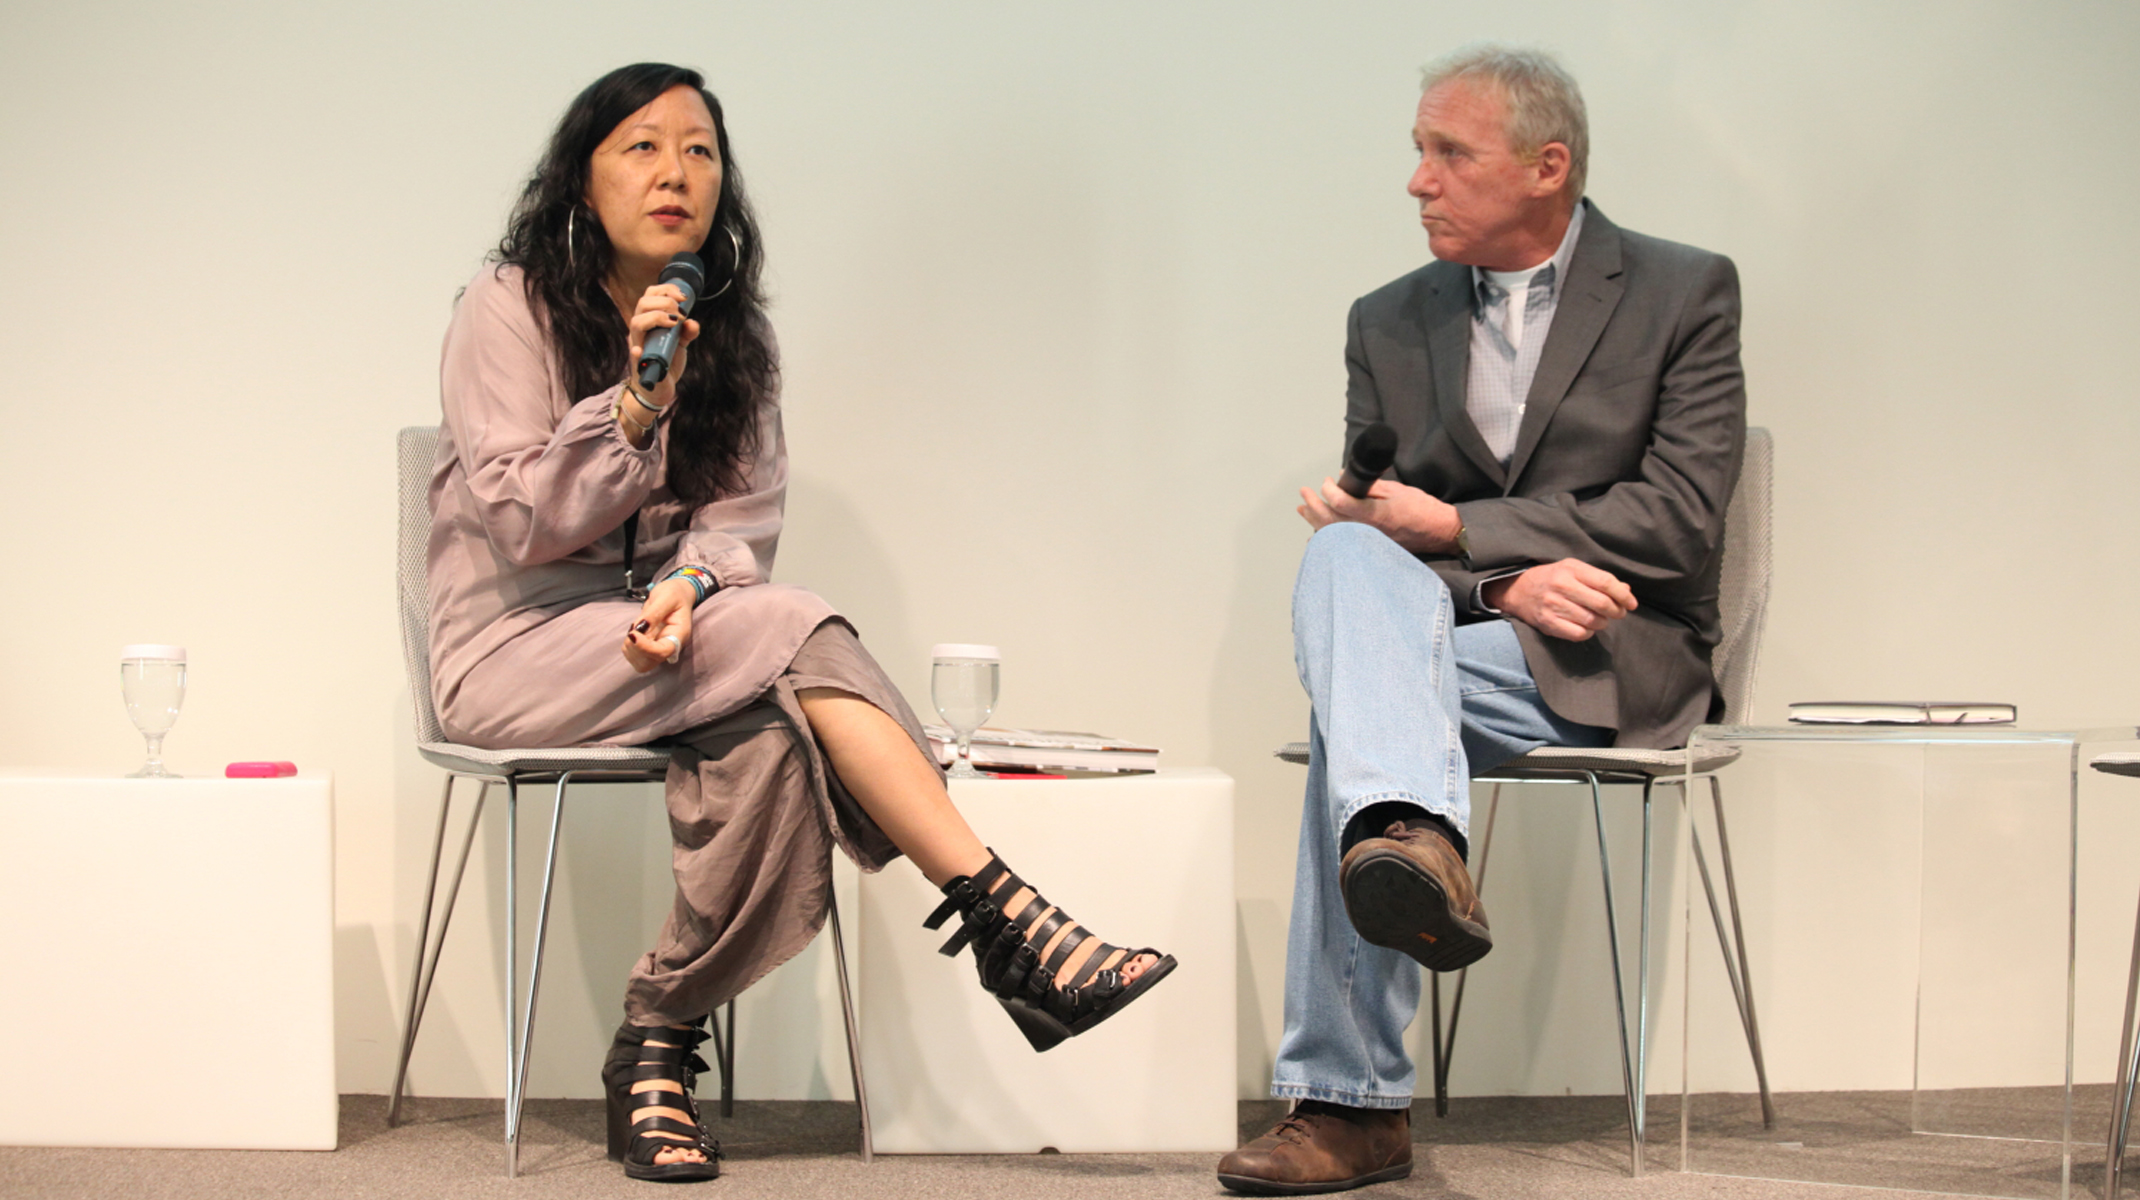 Eungie Joo in Conversation with William Wells Image